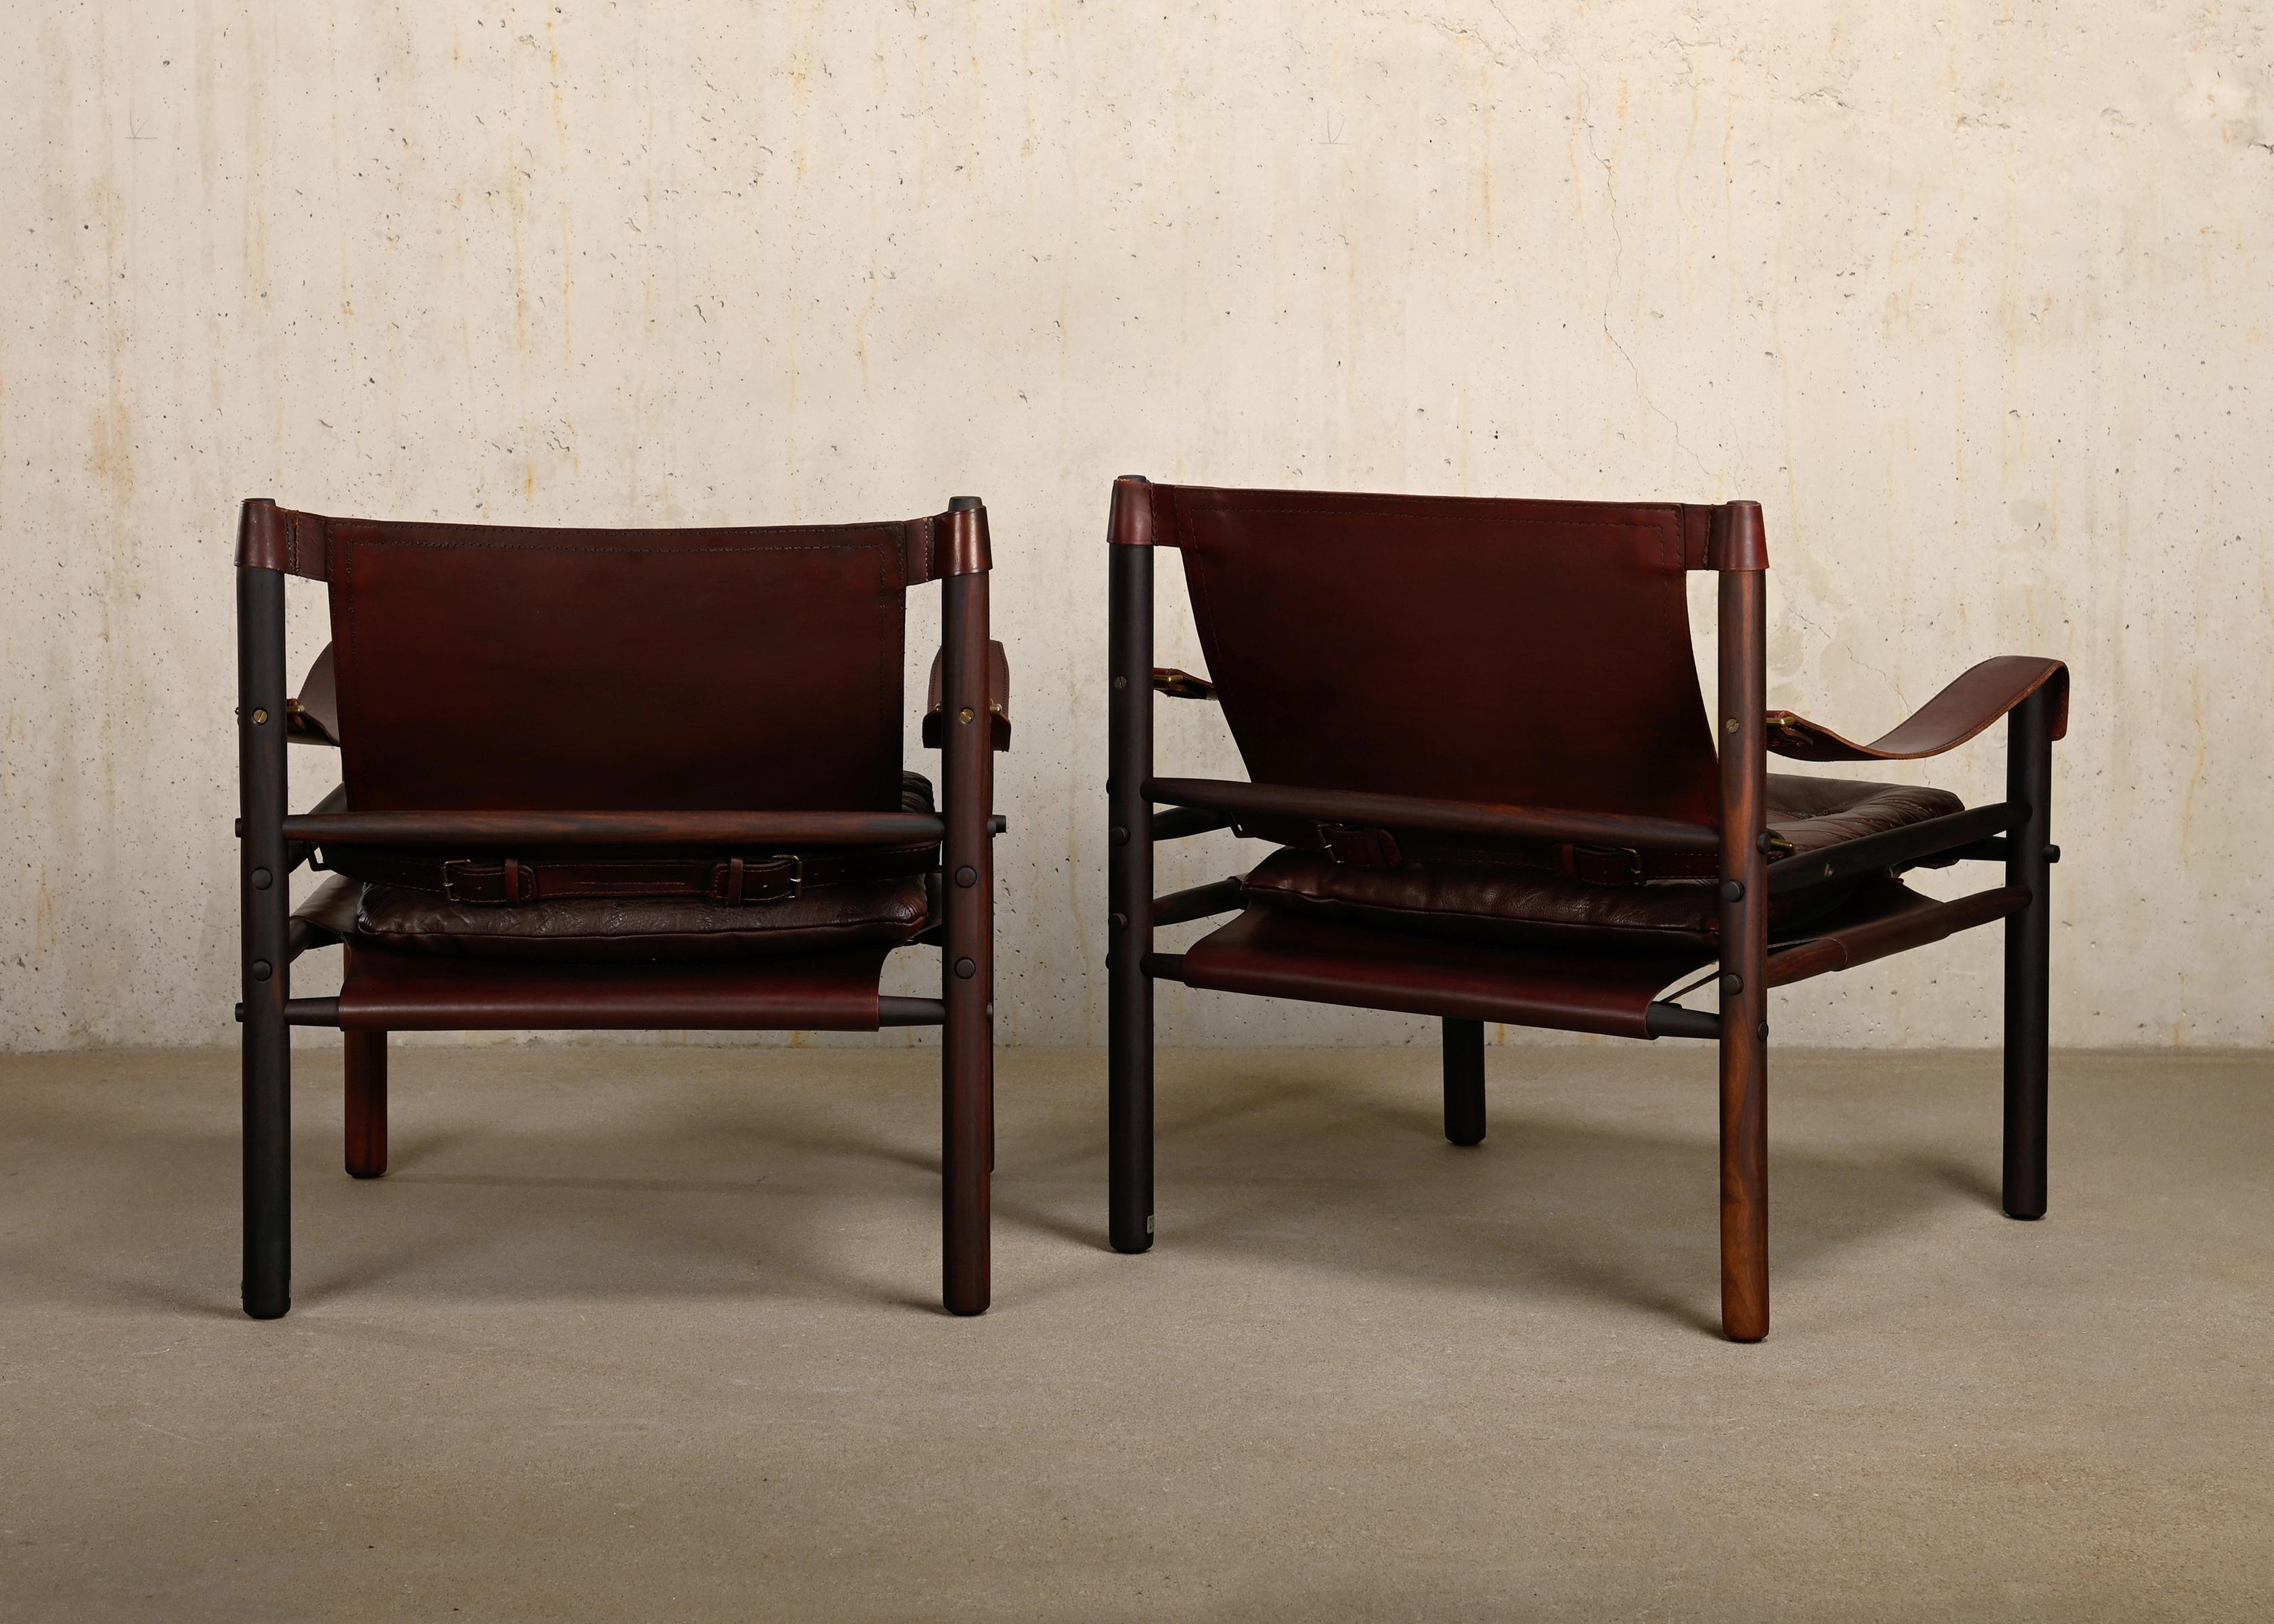 Scandinavian Modern Arne Norell pair Sirocco Safari Lounge Chairs in Chocolate leather, Sweden